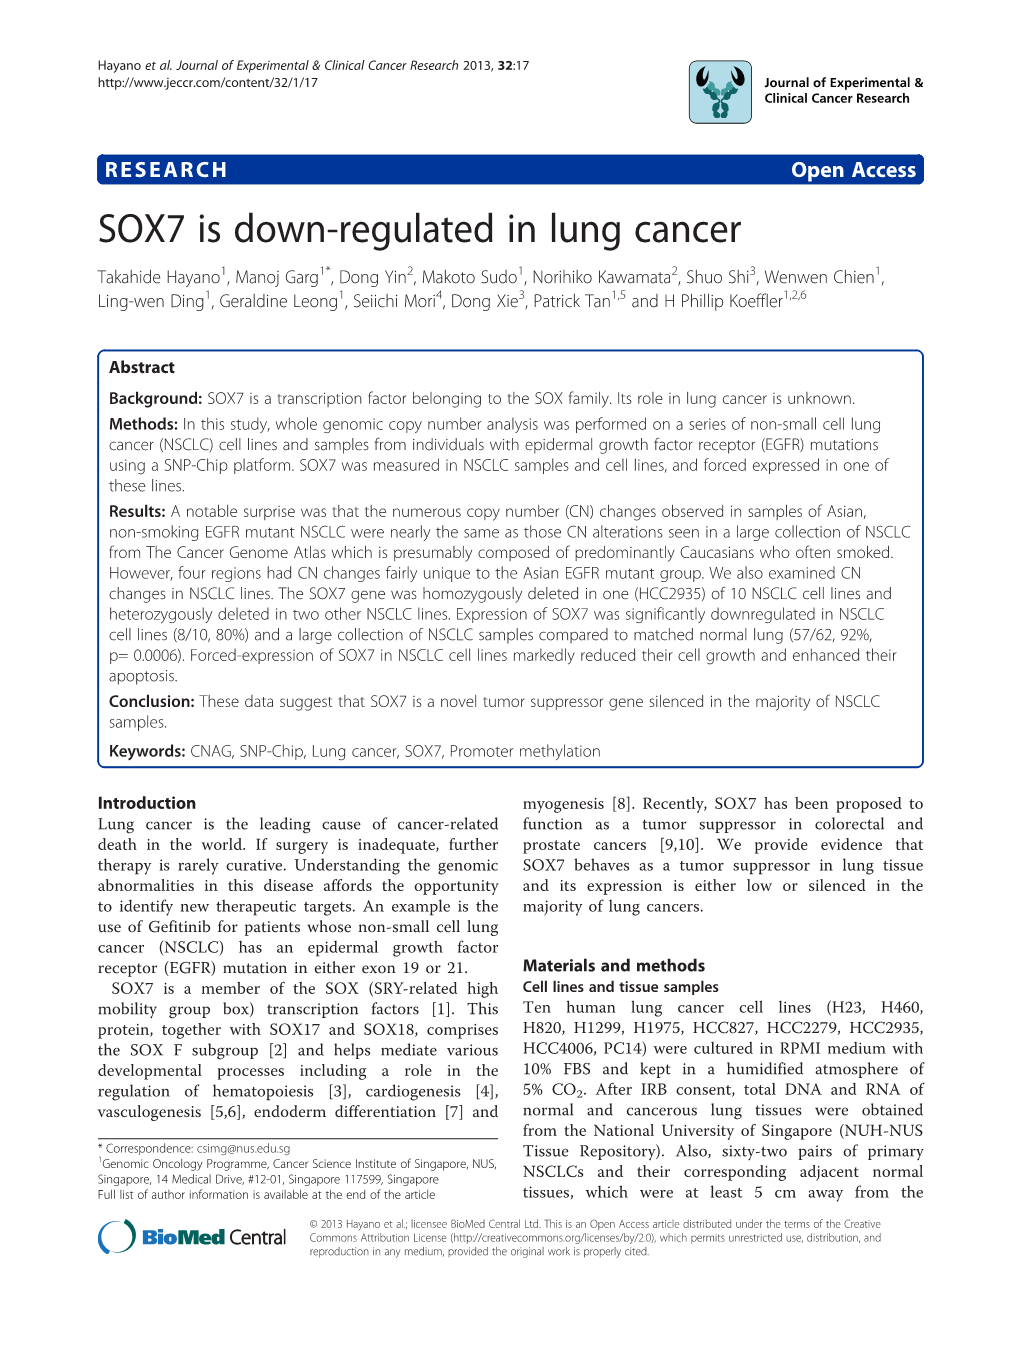 SOX7 Is Down-Regulated in Lung Cancer